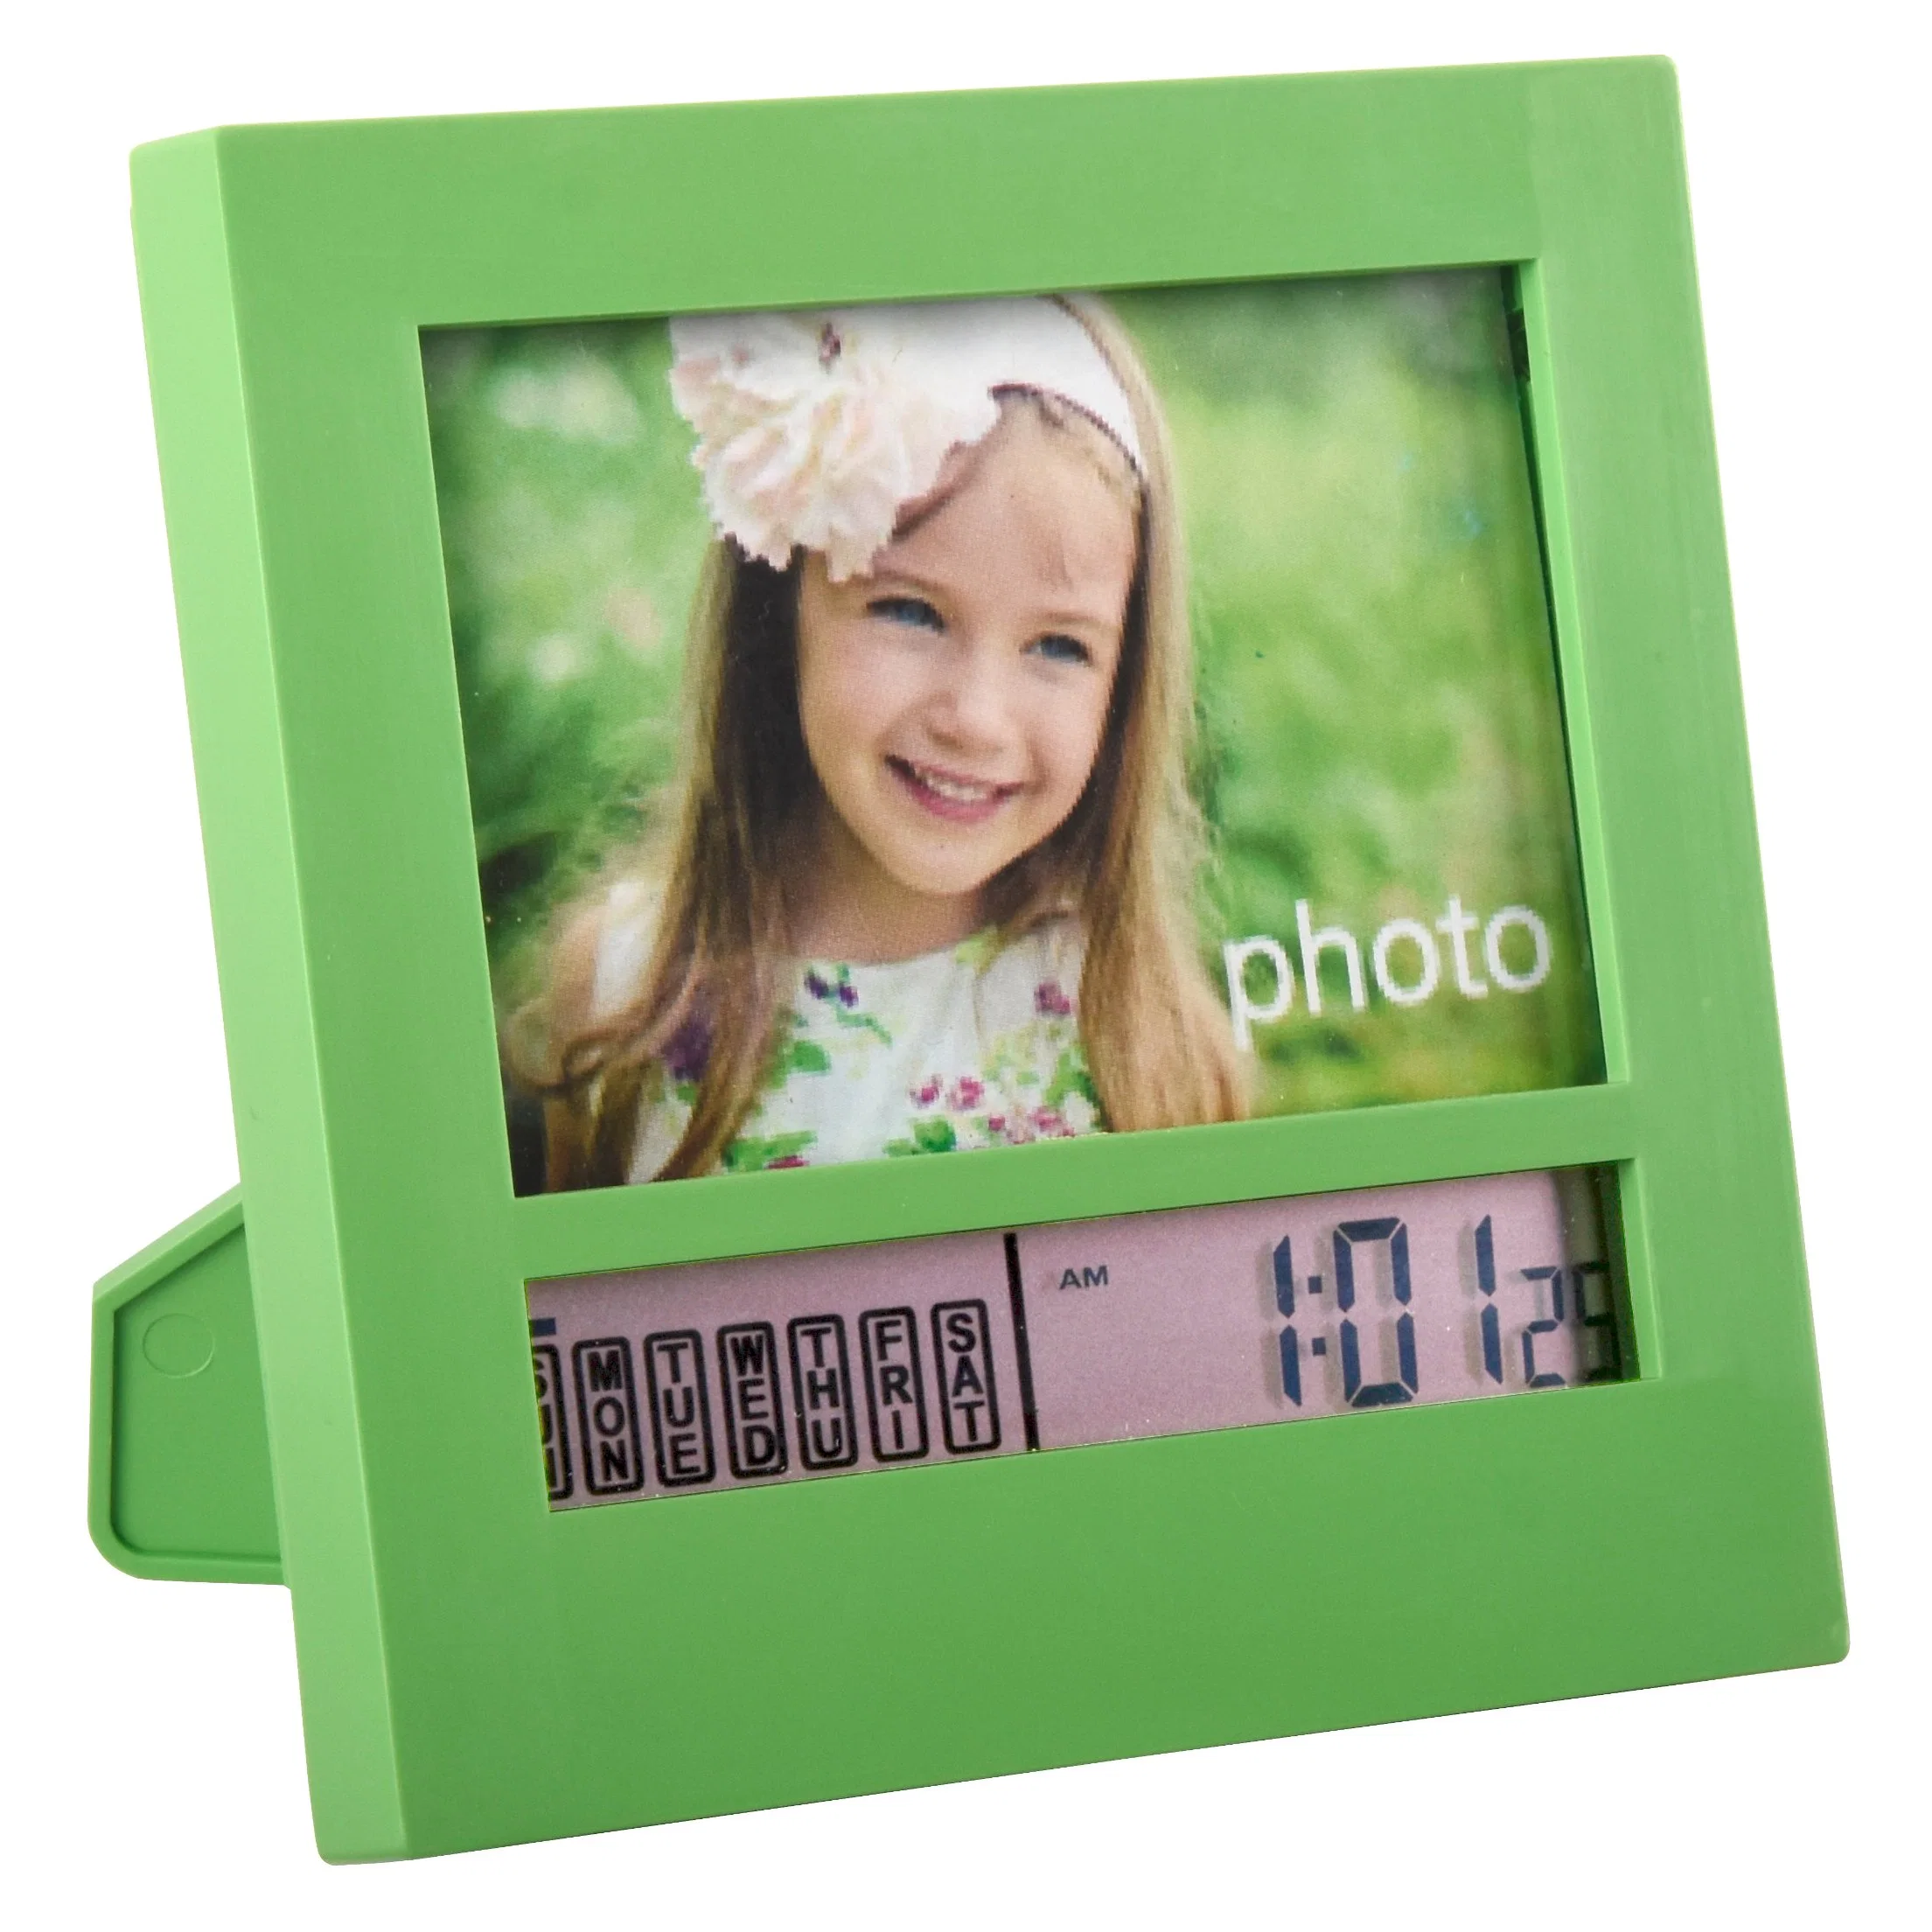 Photo Frame LCD Display Digital Table Alarm Desk Clock Snooze Function Calendar Multi-Color, Battery Operated